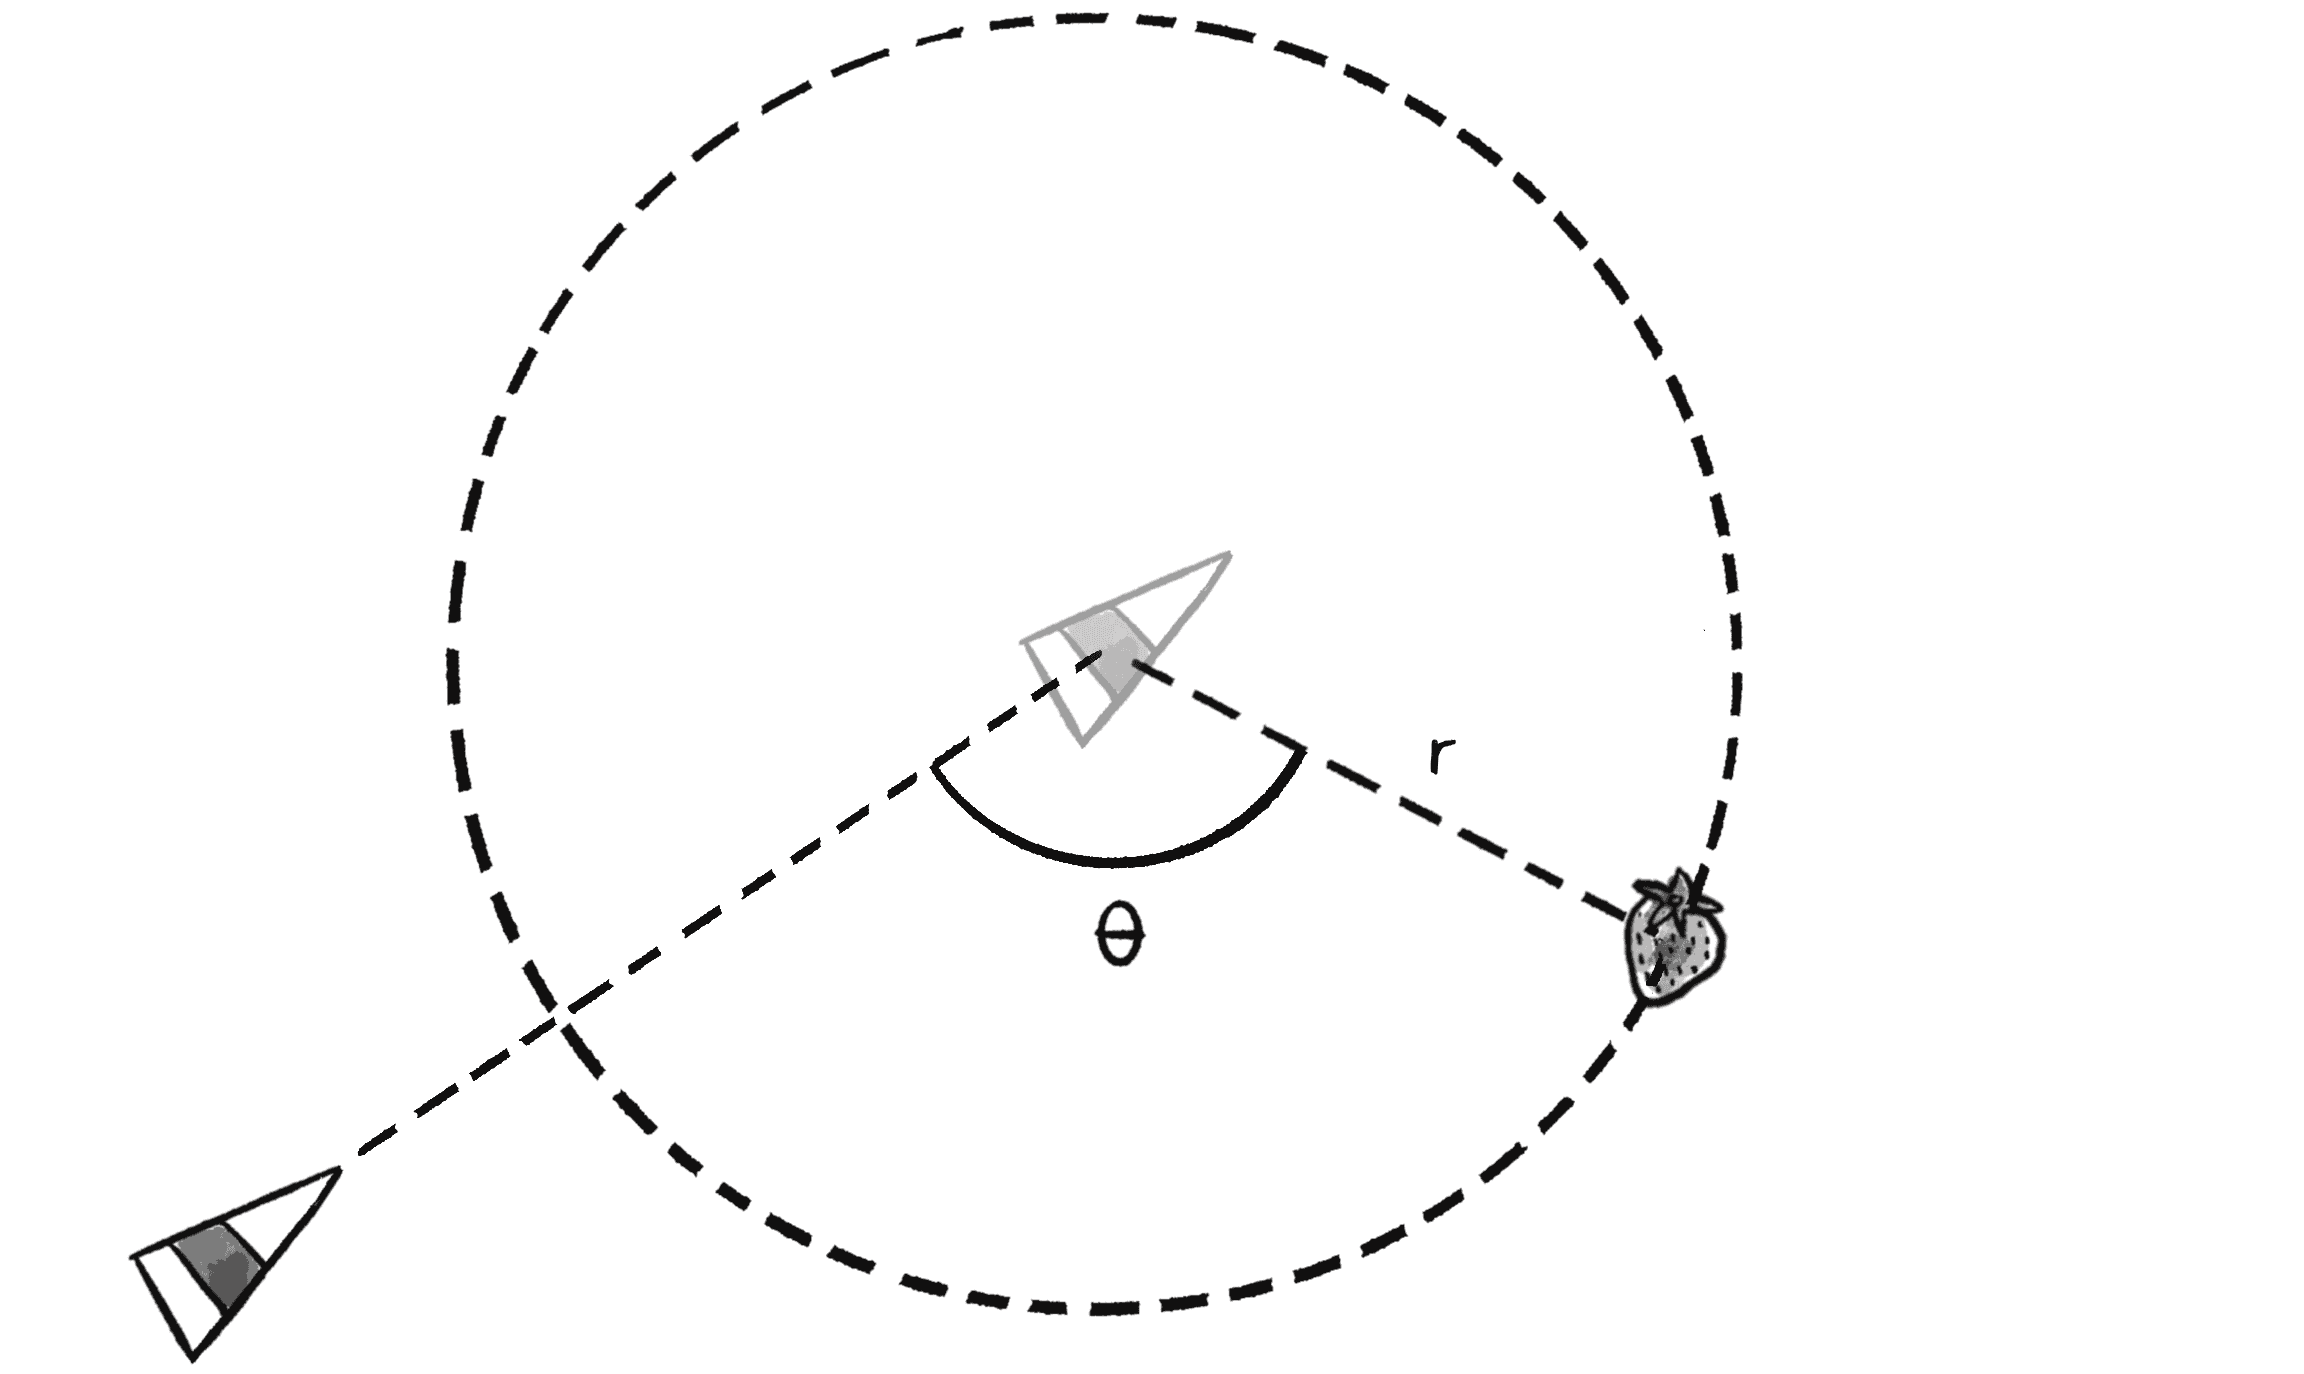 Figure 5.11: The wandering steering behavior is calculated as seeking a target that moves randomly along the perimeter of a circle projected in front of the vehicle.